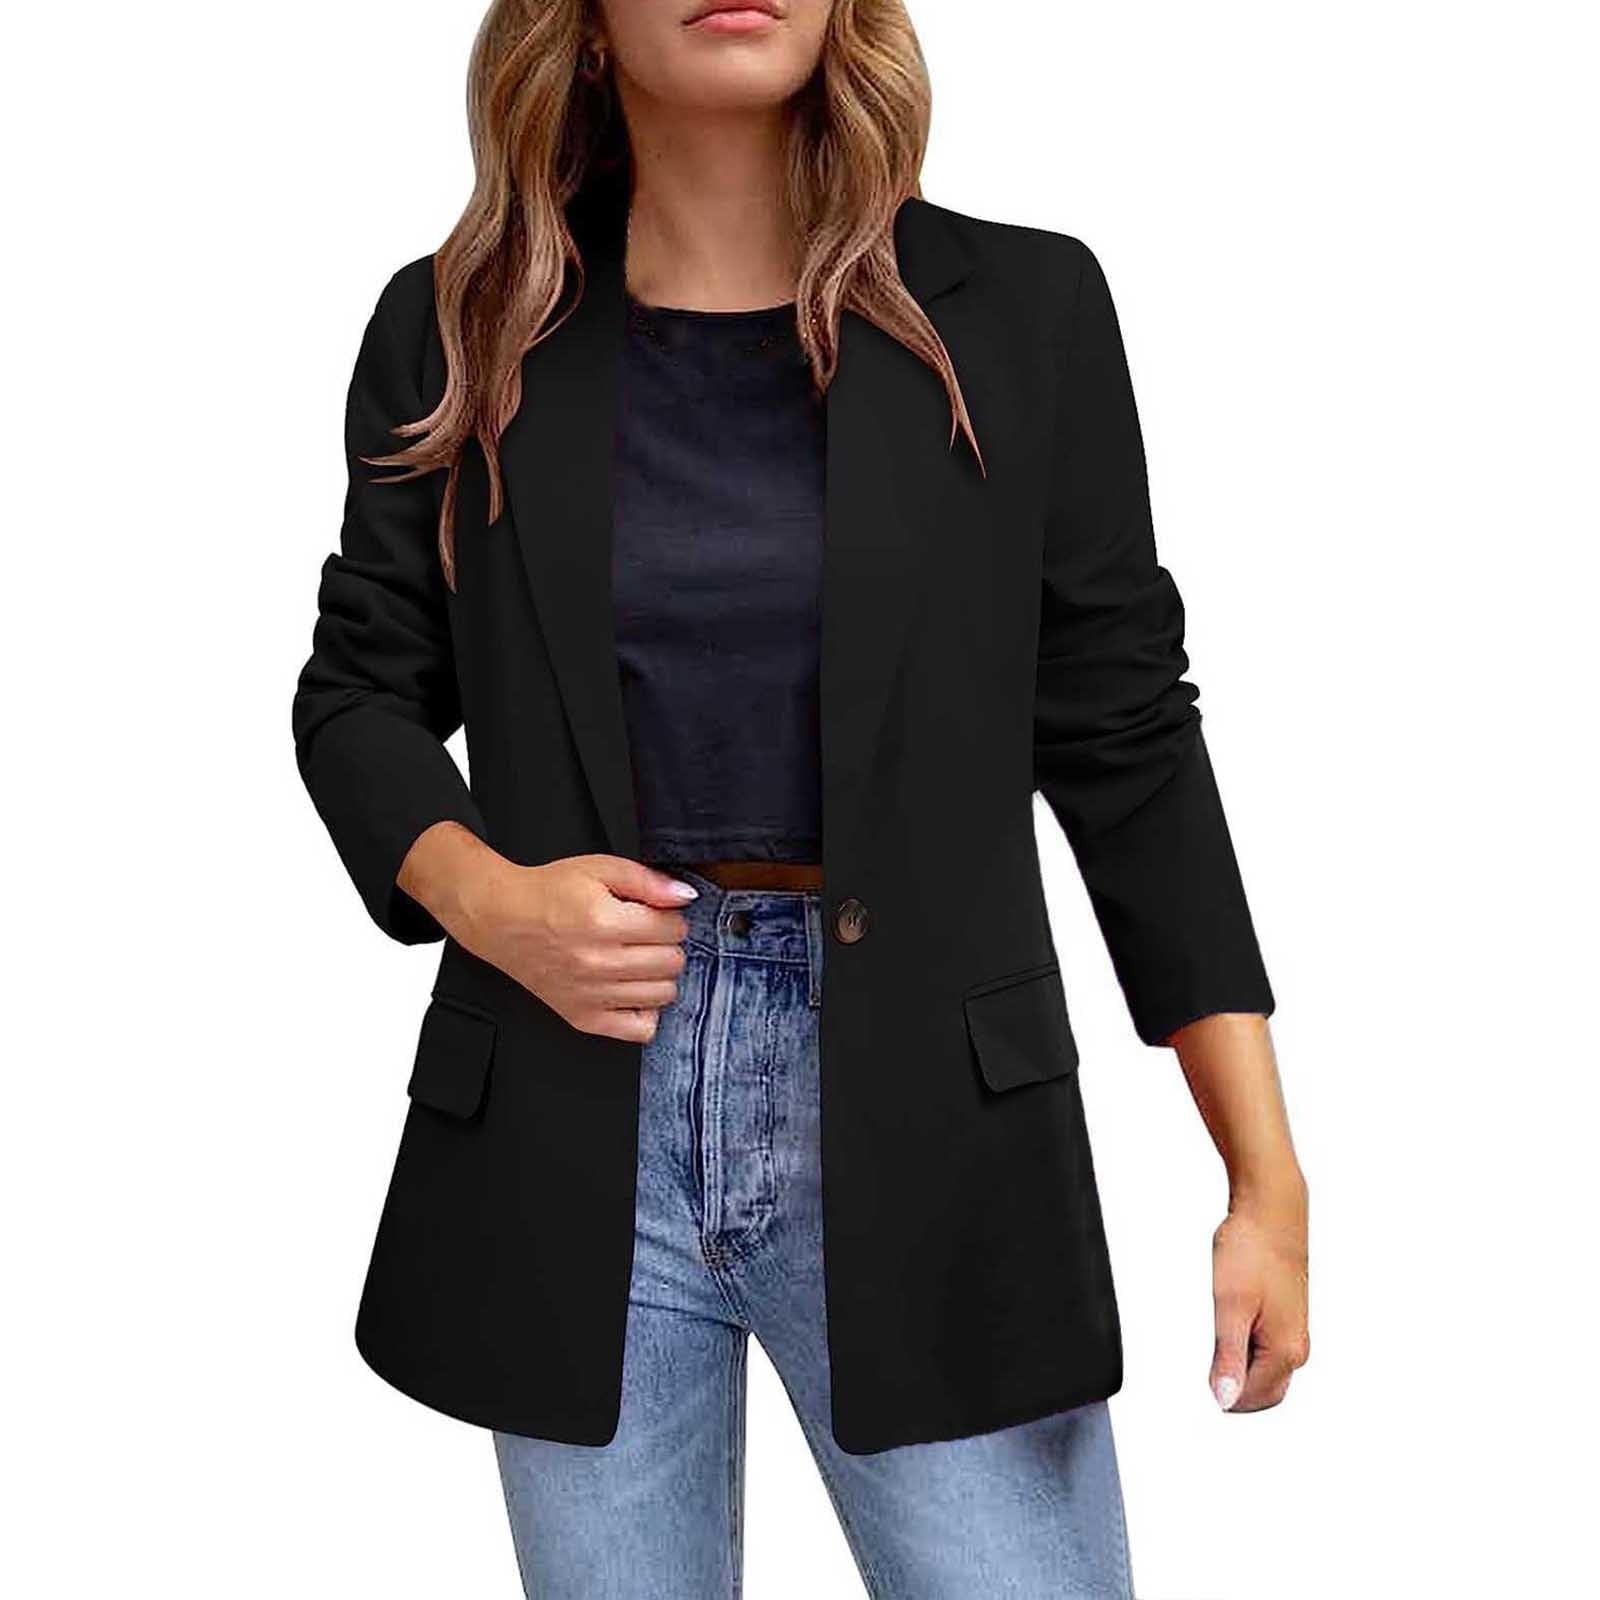 YYDGH Womens Casual Single Breasted Blazer Jacket Pockets Long Sleeve ...